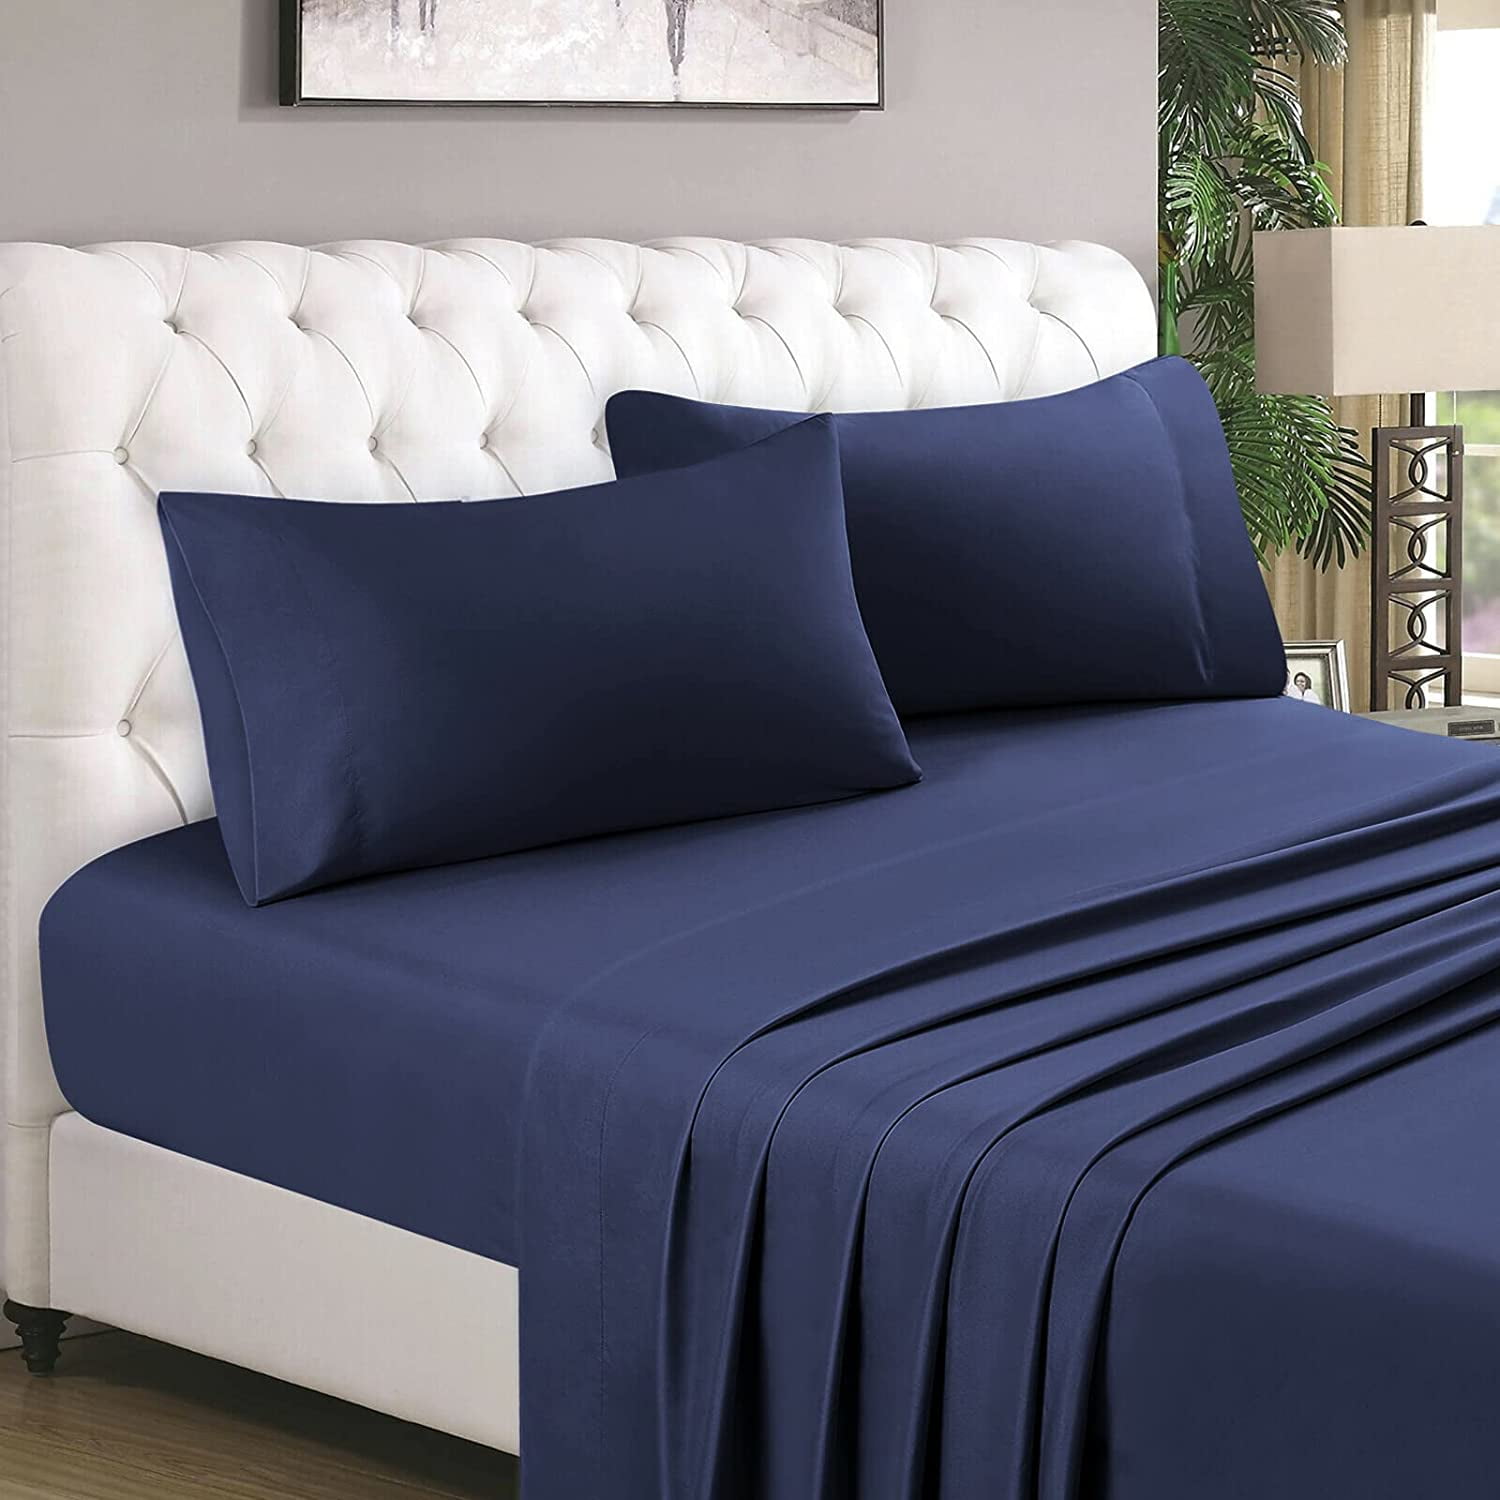 100% Egyptian Cotton Fitted Sheet 300 Thread Count 30cm Extra Deep All Sizes 